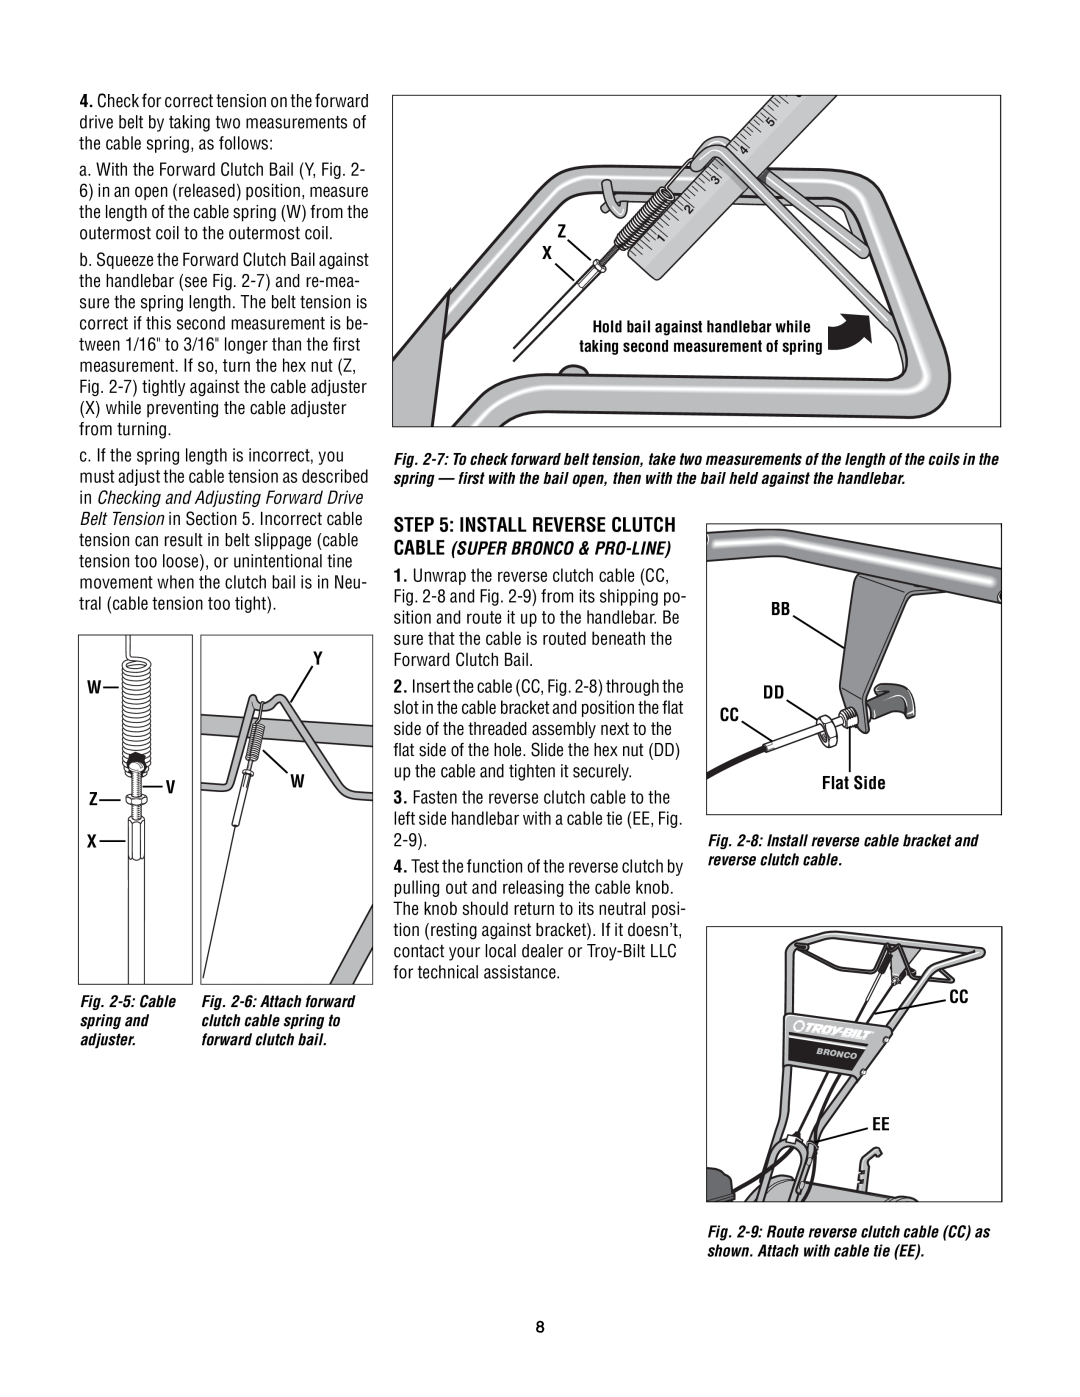 Troy-Bilt Super Bronco manual X while preventing the cable adjuster from turning, Flat Side 